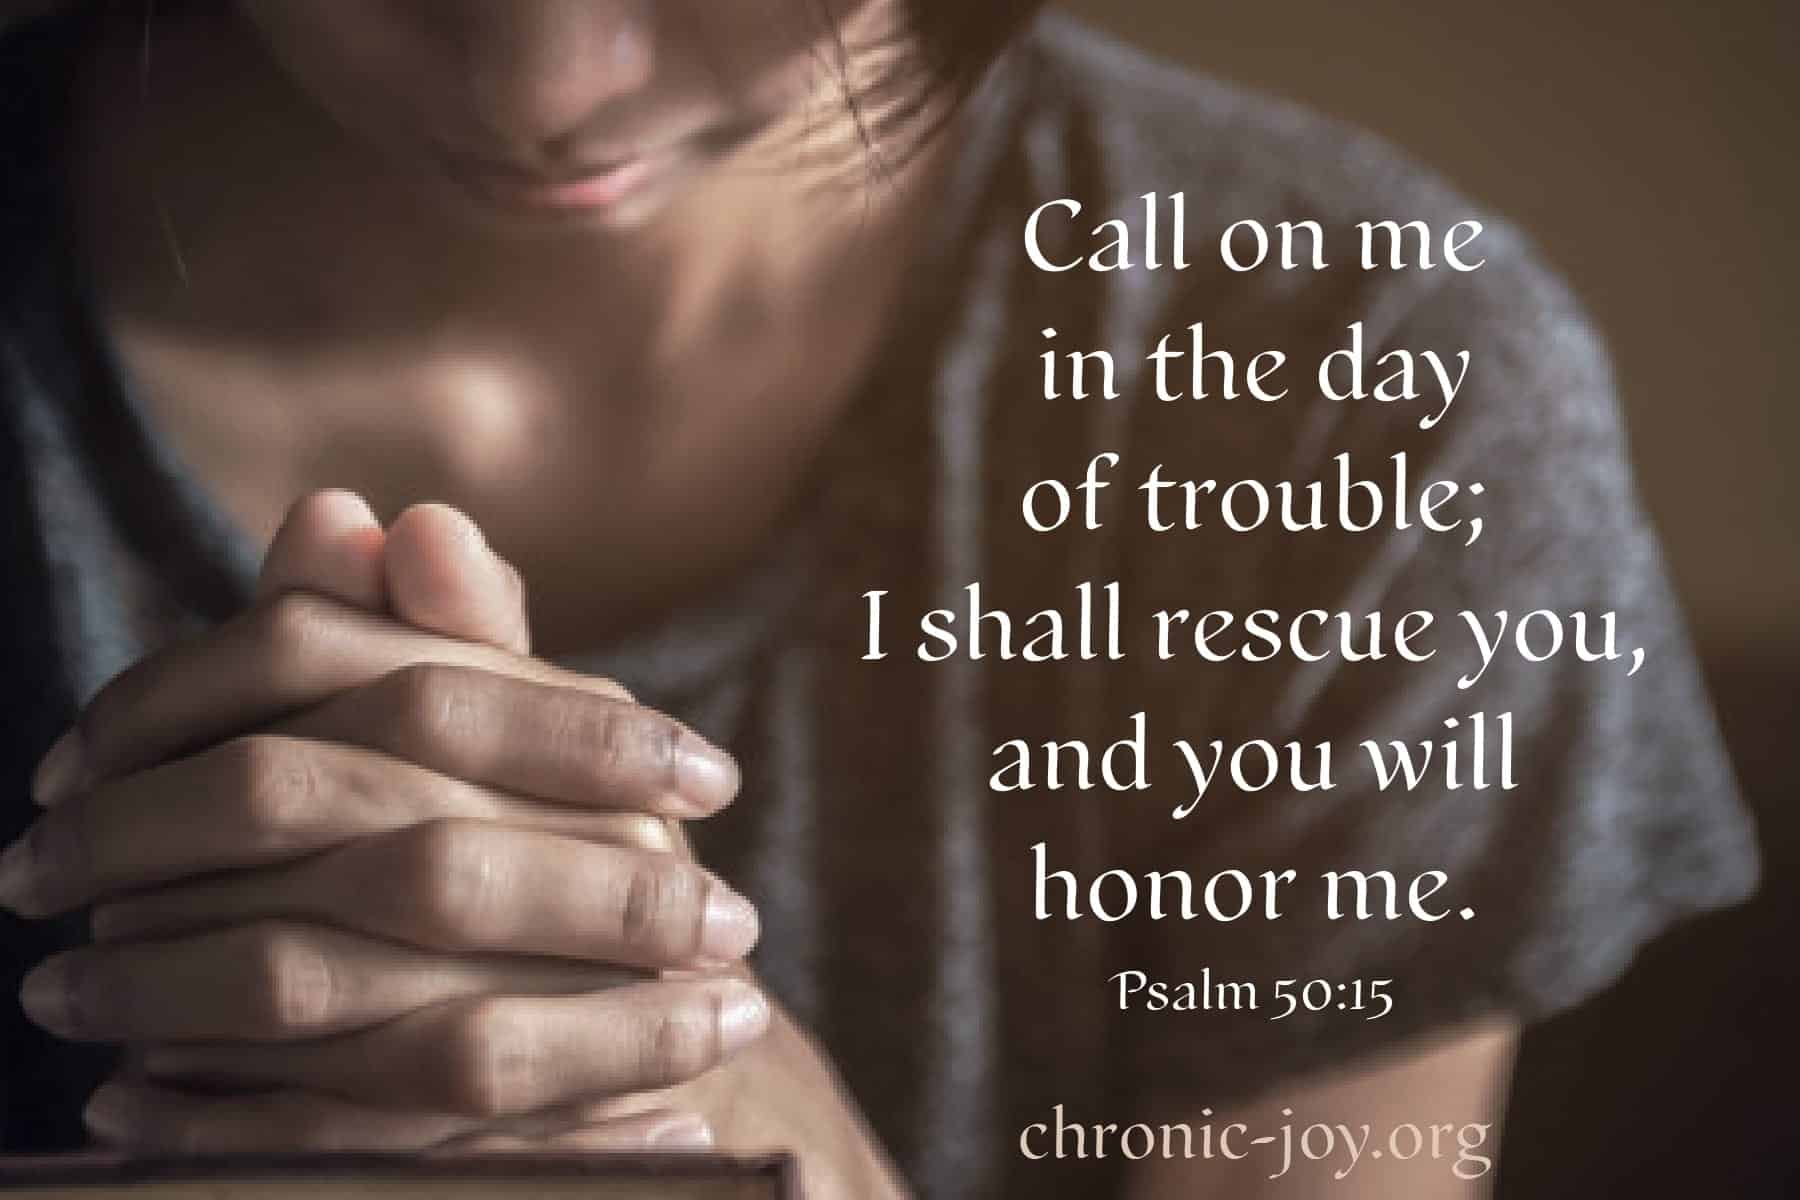 Call on me in the day of trouble;